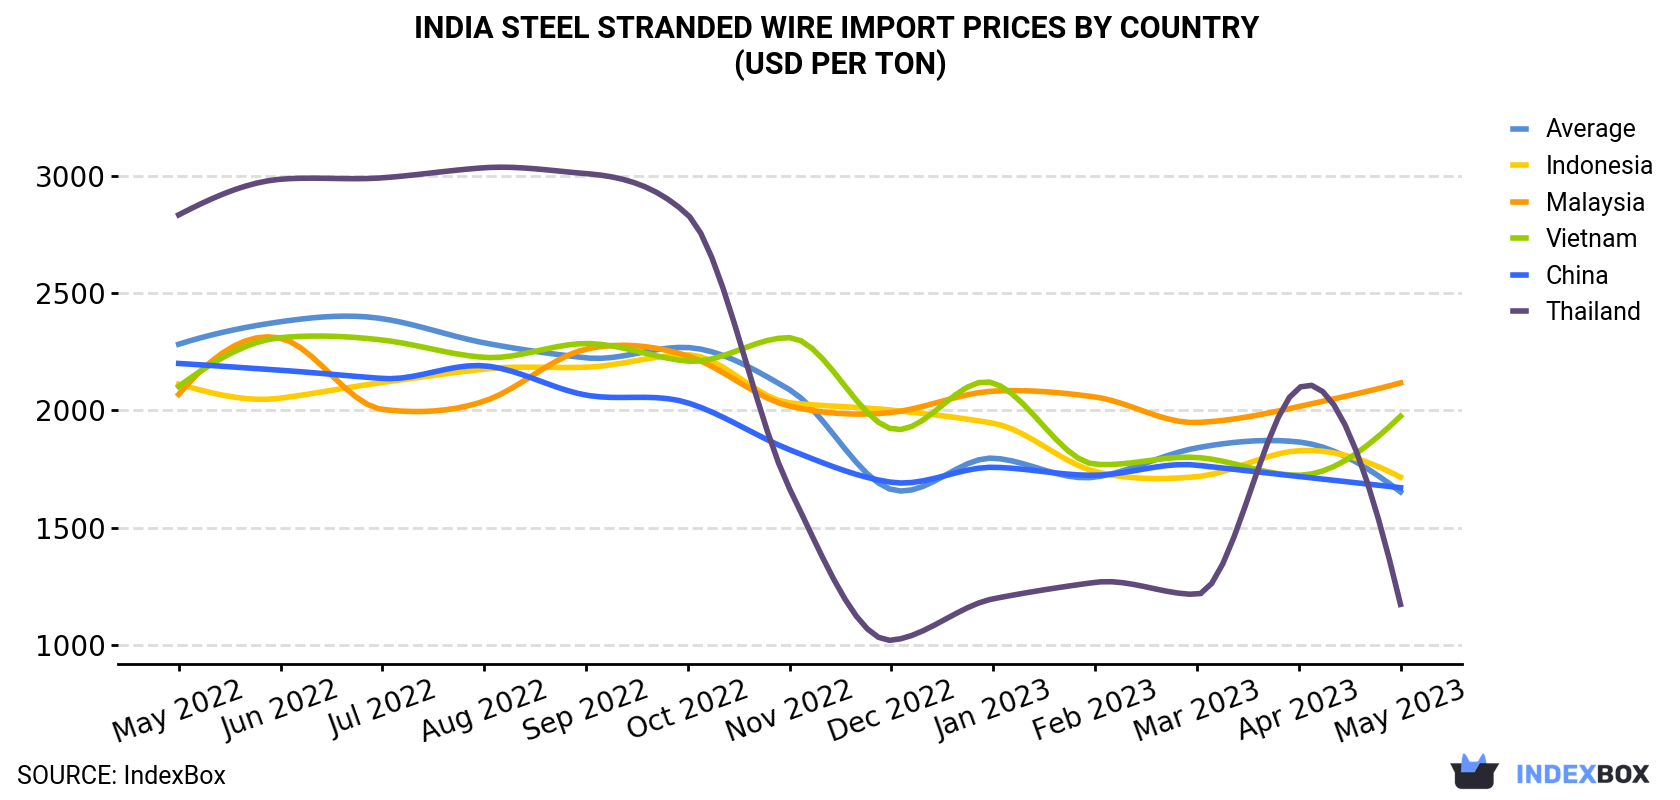 India Steel Stranded Wire Import Prices By Country (USD Per Ton)